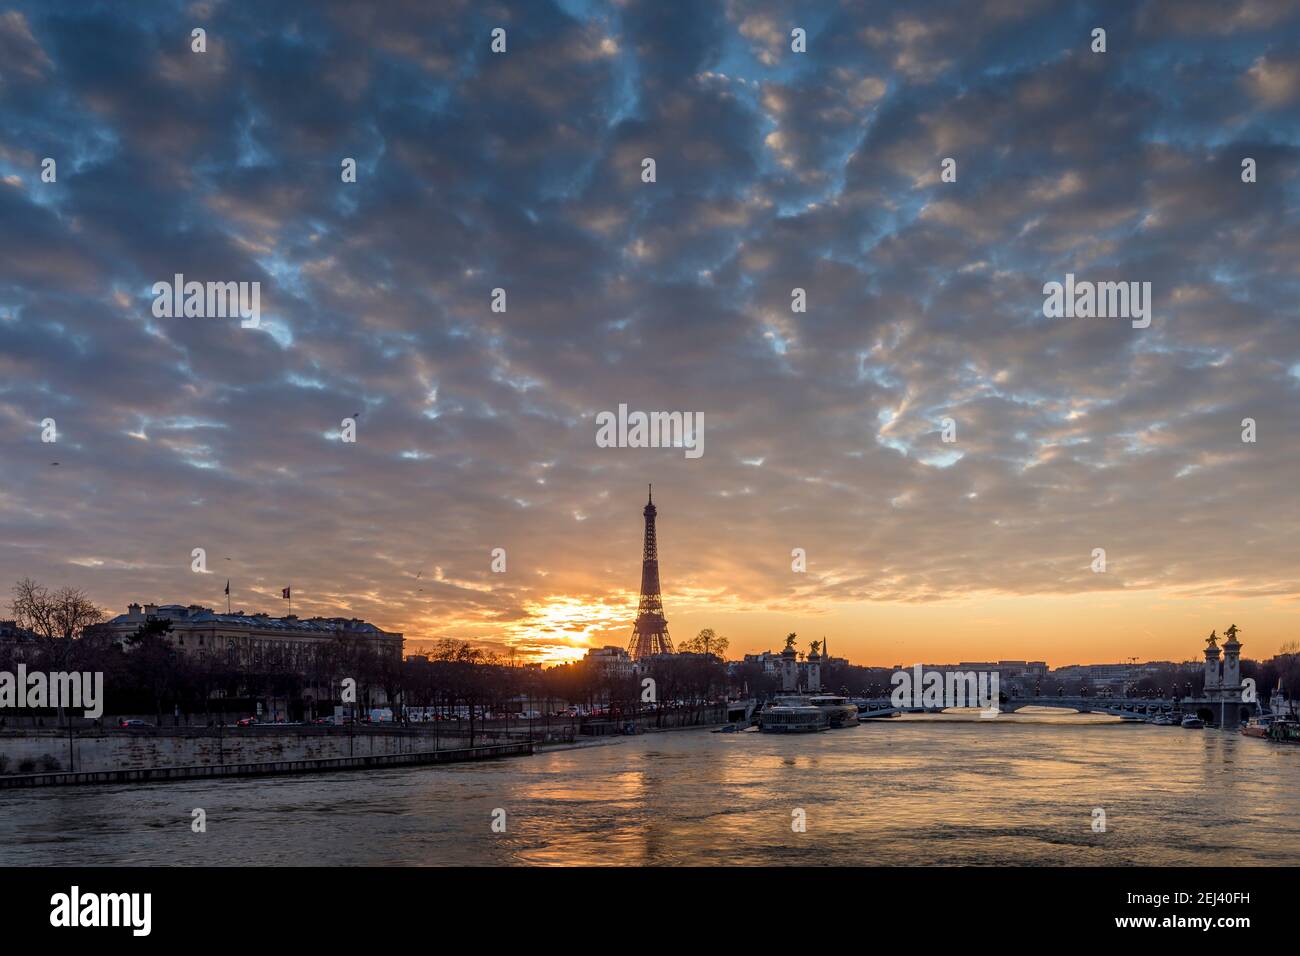 Paris, France - February 12, 2021: CItyscape of Paris in winter. Ships and brigde over Seine river with Eiffel tower in background and dramatic cloudy Stock Photo